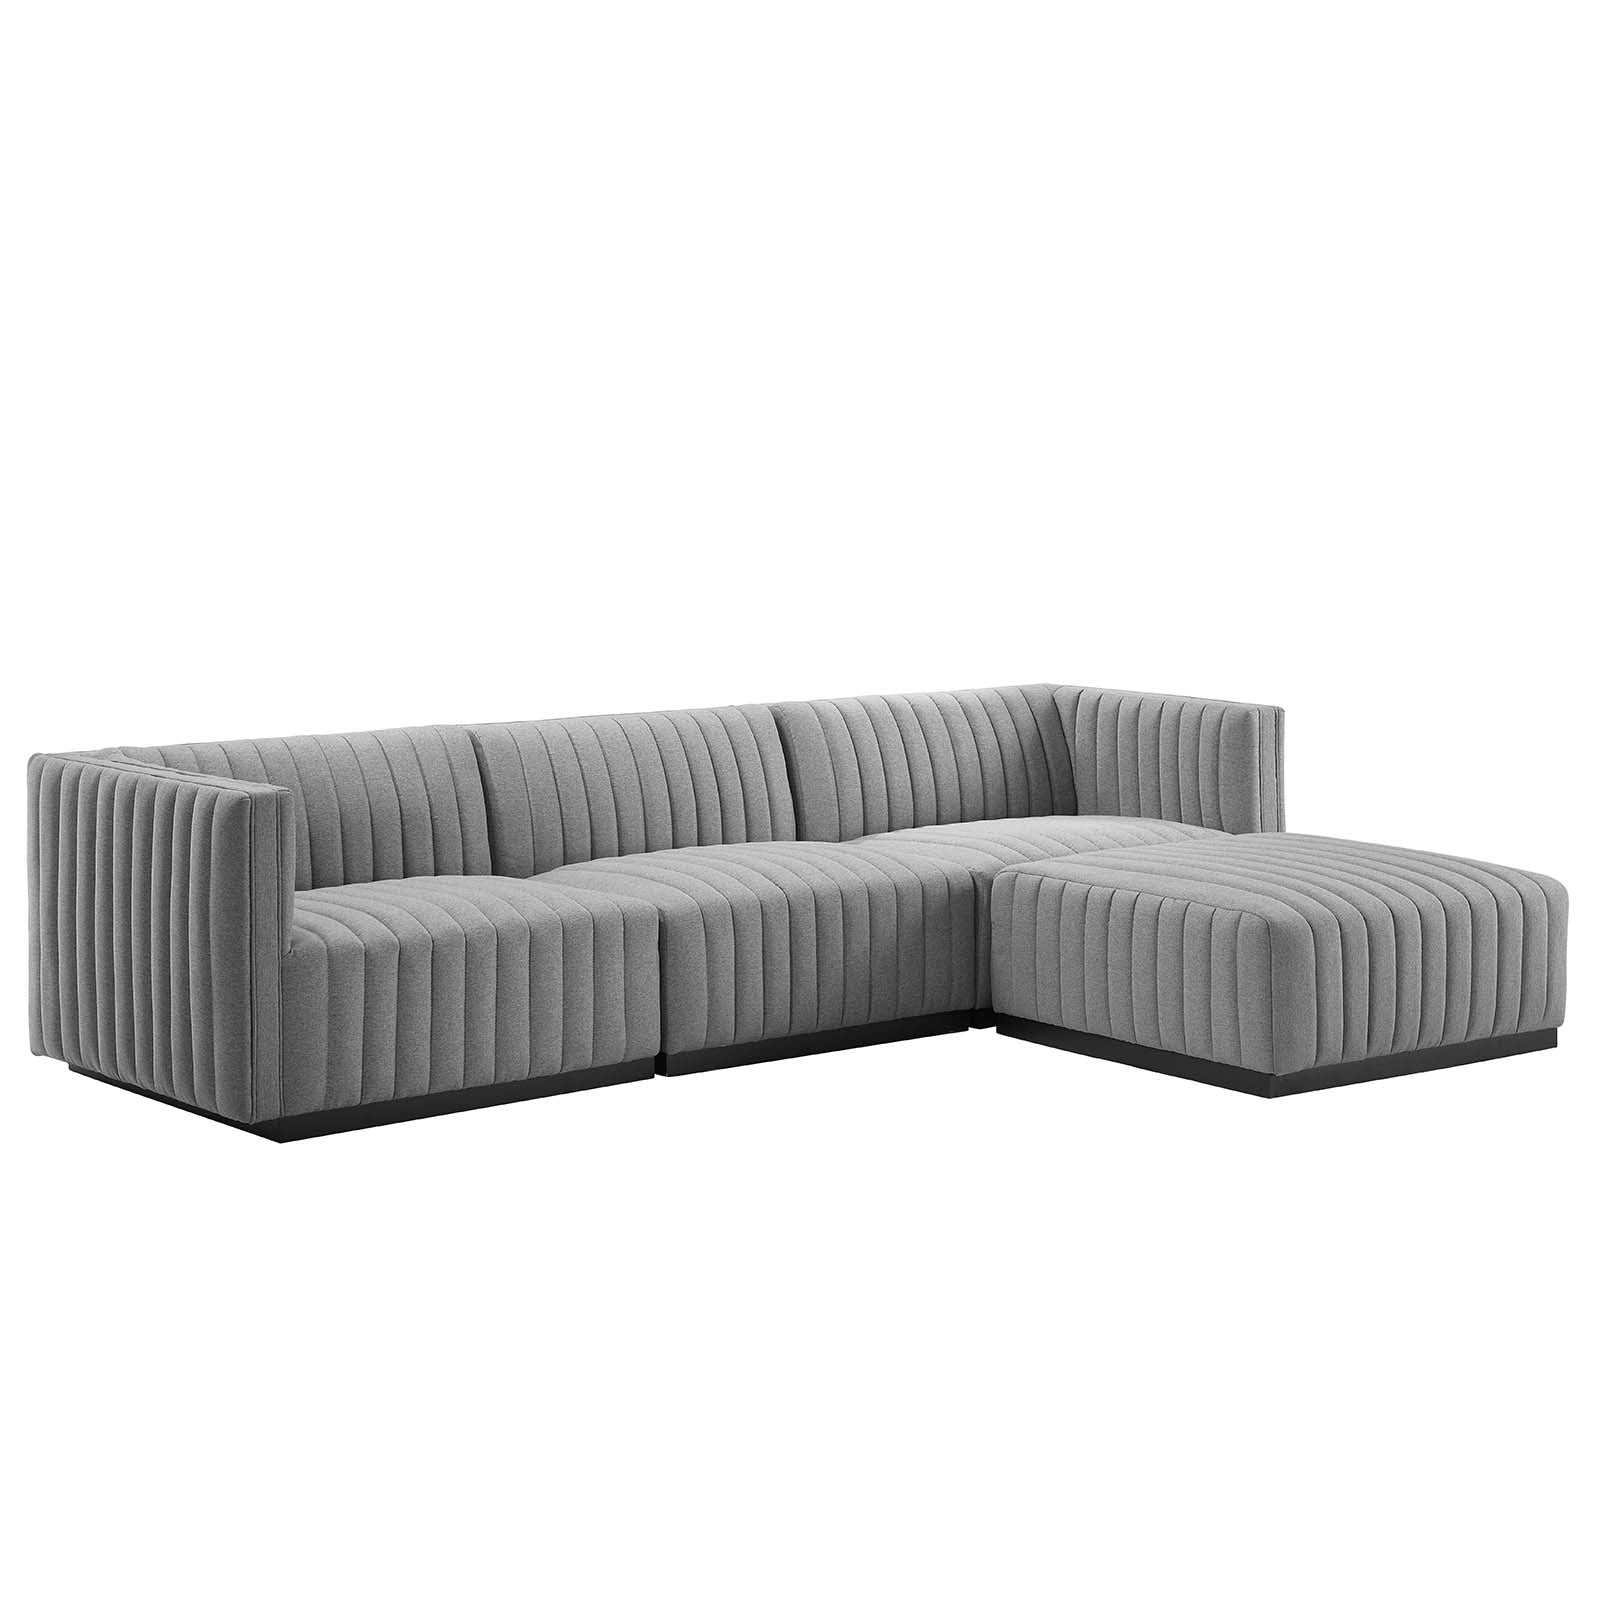 Modway Sectional Sofas - Conjure Channel Tufted Upholstered Fabric 4-Piece Sectional Sofa Black Light Gray